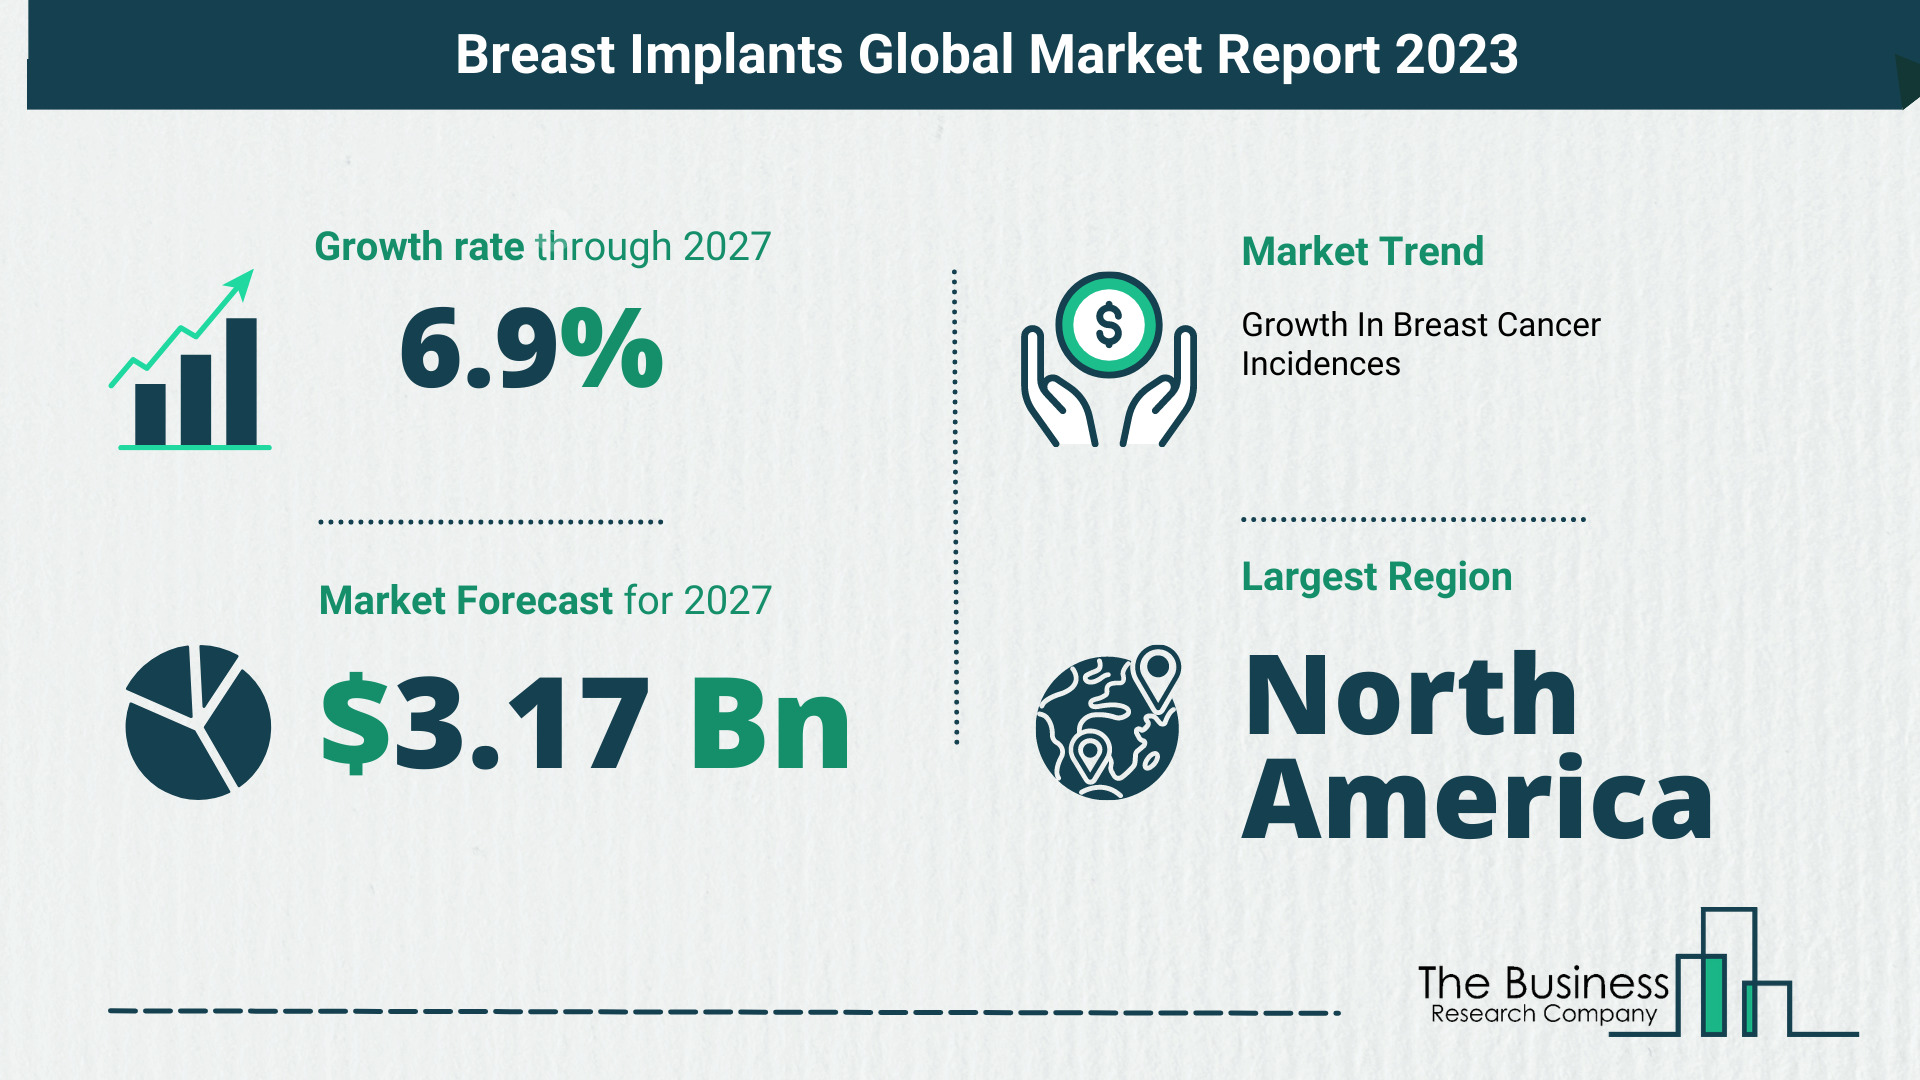 How Will The Breast Implants Market Size Grow In The Coming Years?